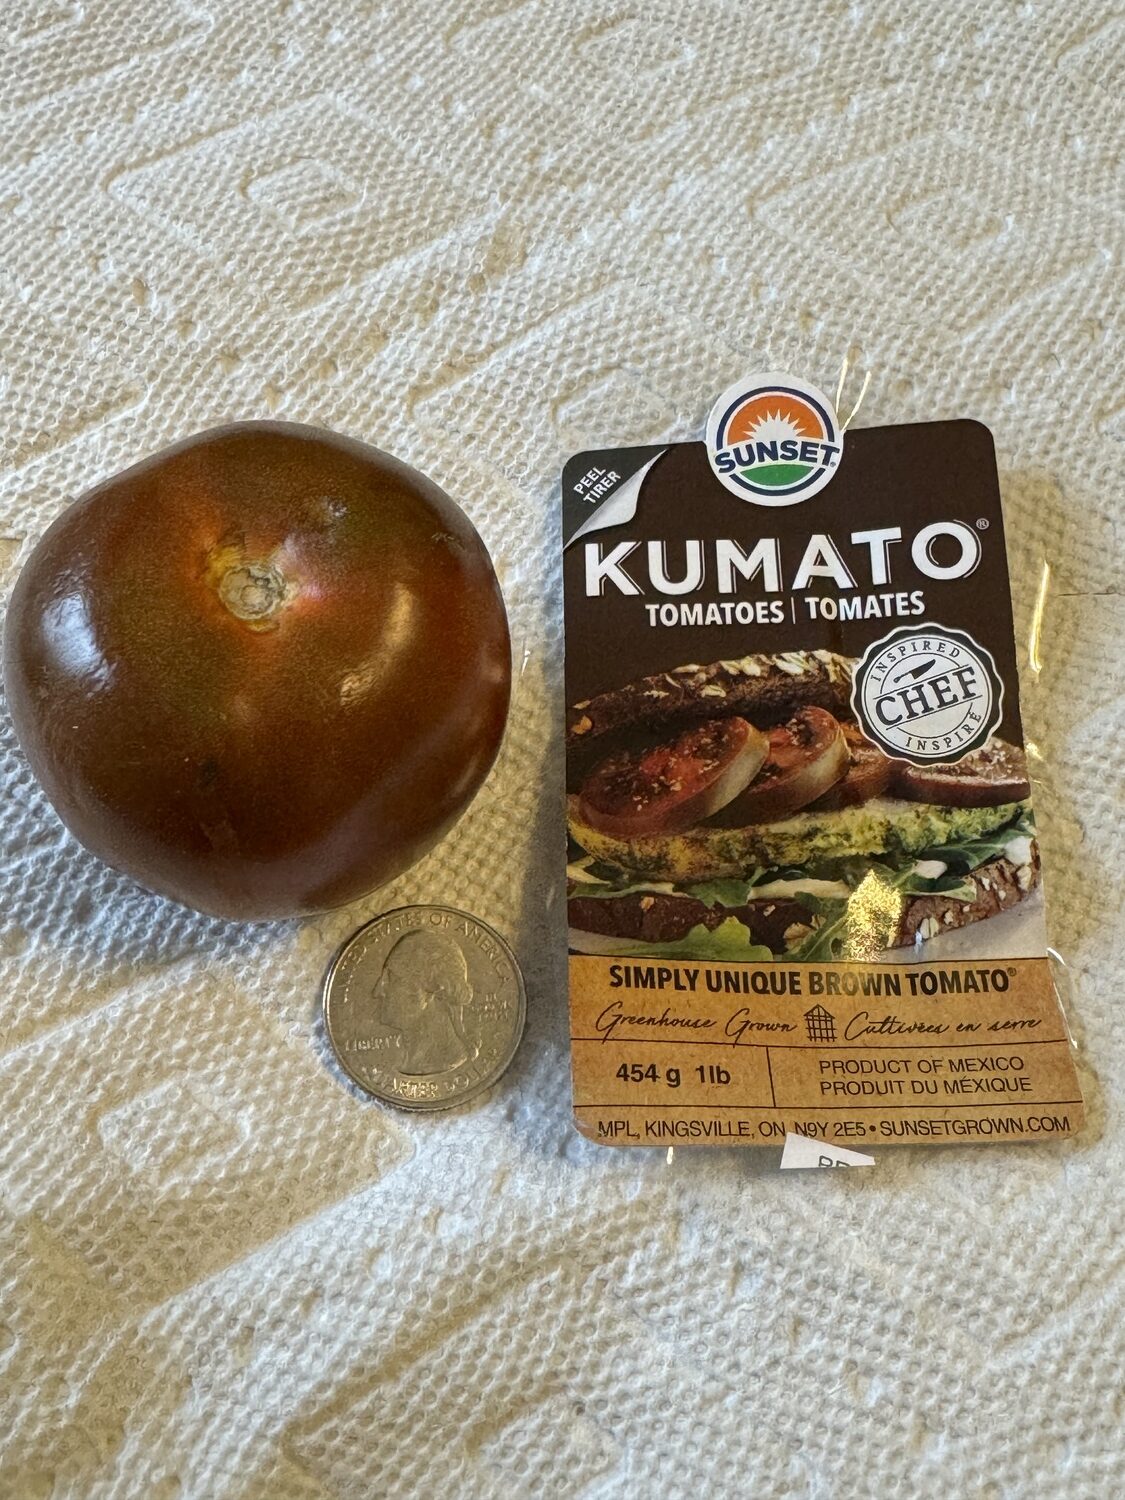 This is the smaller size Kumato, and if the color is an indication this is at peak flavor.  Chef-inspired though? ANDREW MESSINGER